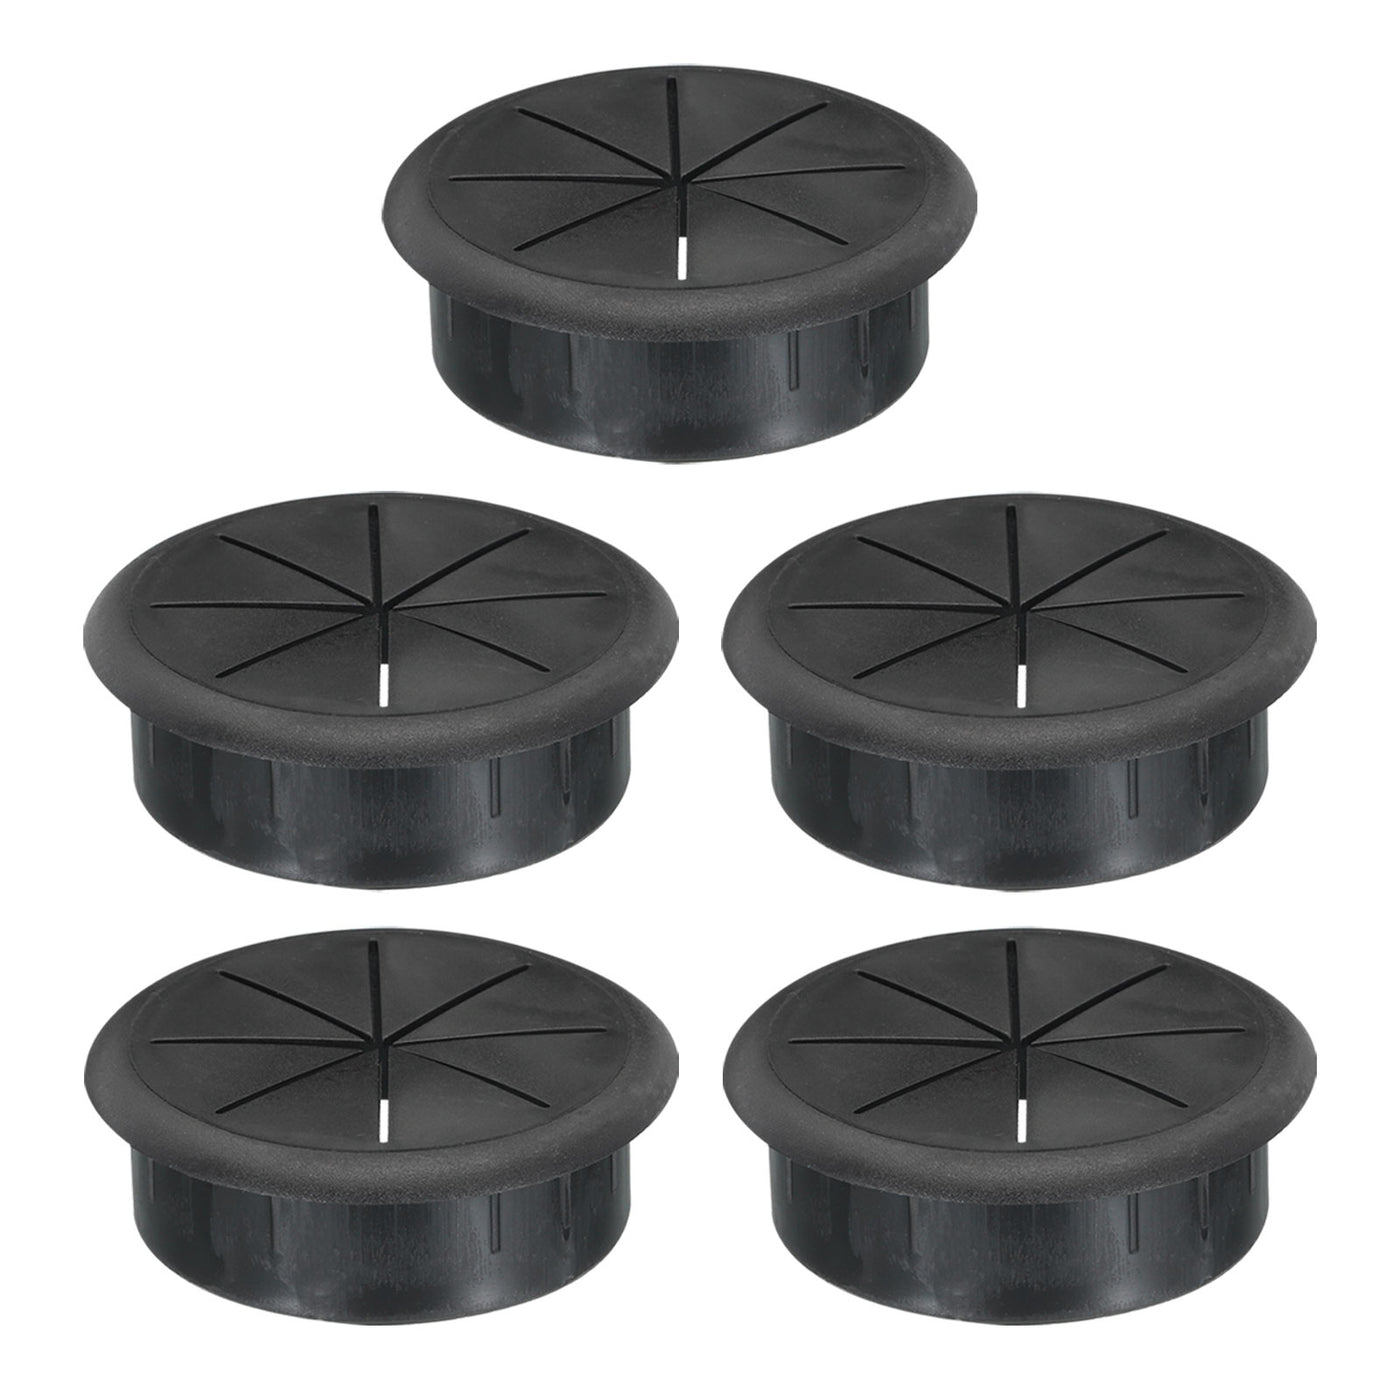 uxcell Uxcell 5pcs 60mm Mounting Dia Black Plastic Cable Snap Locking Bushing Grommet